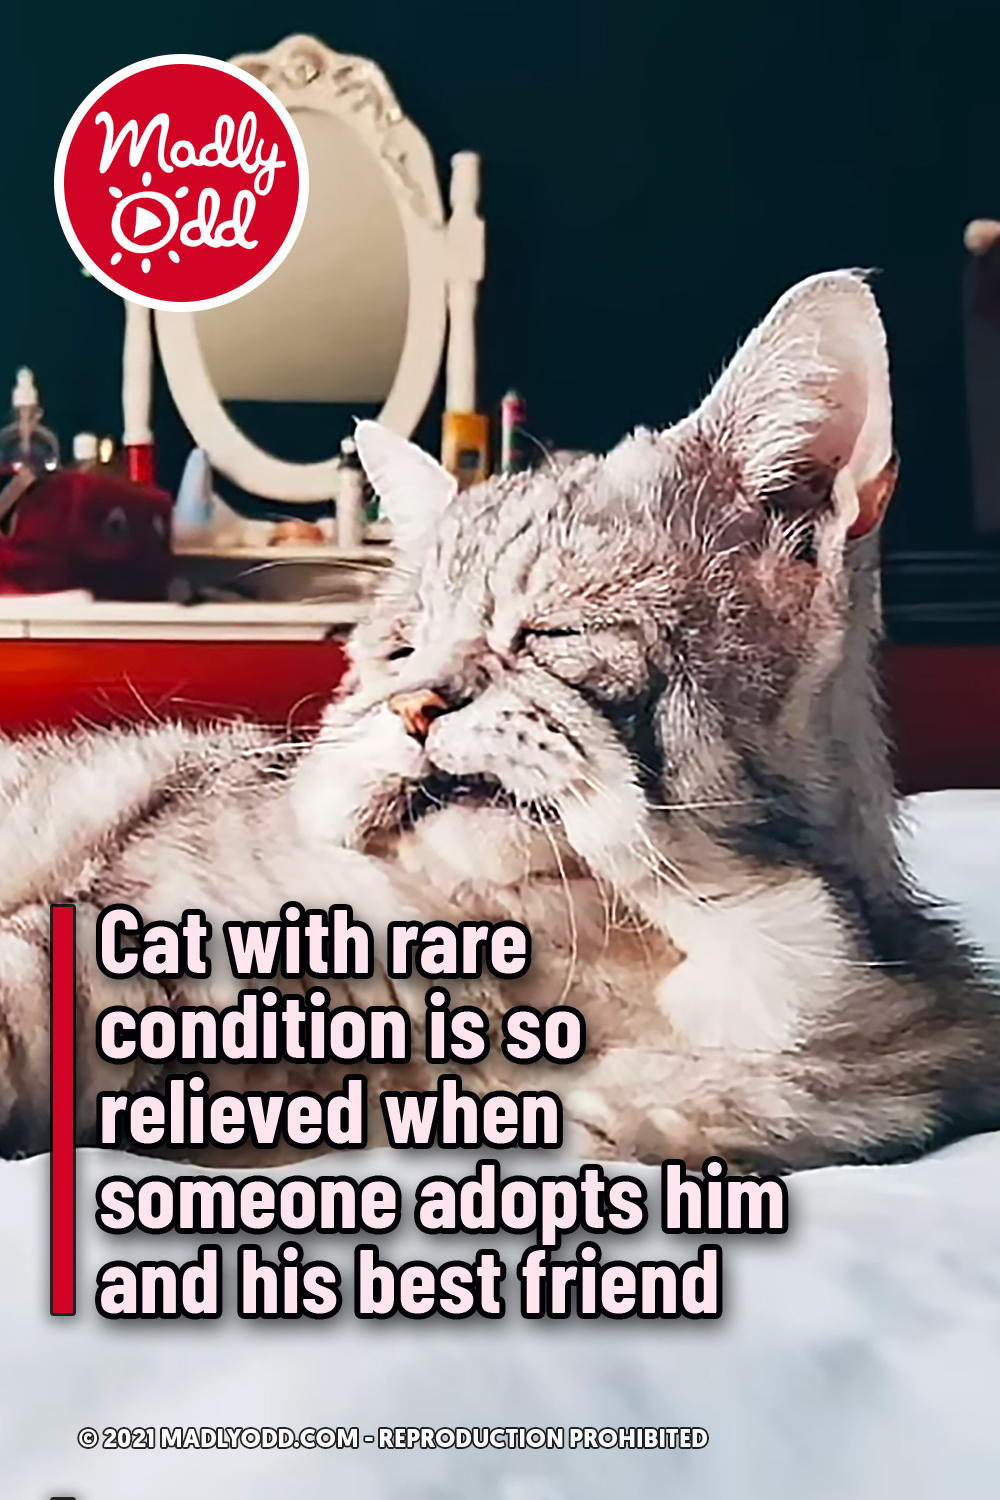 Cat with rare condition is so relieved when someone adopts him and his best friend